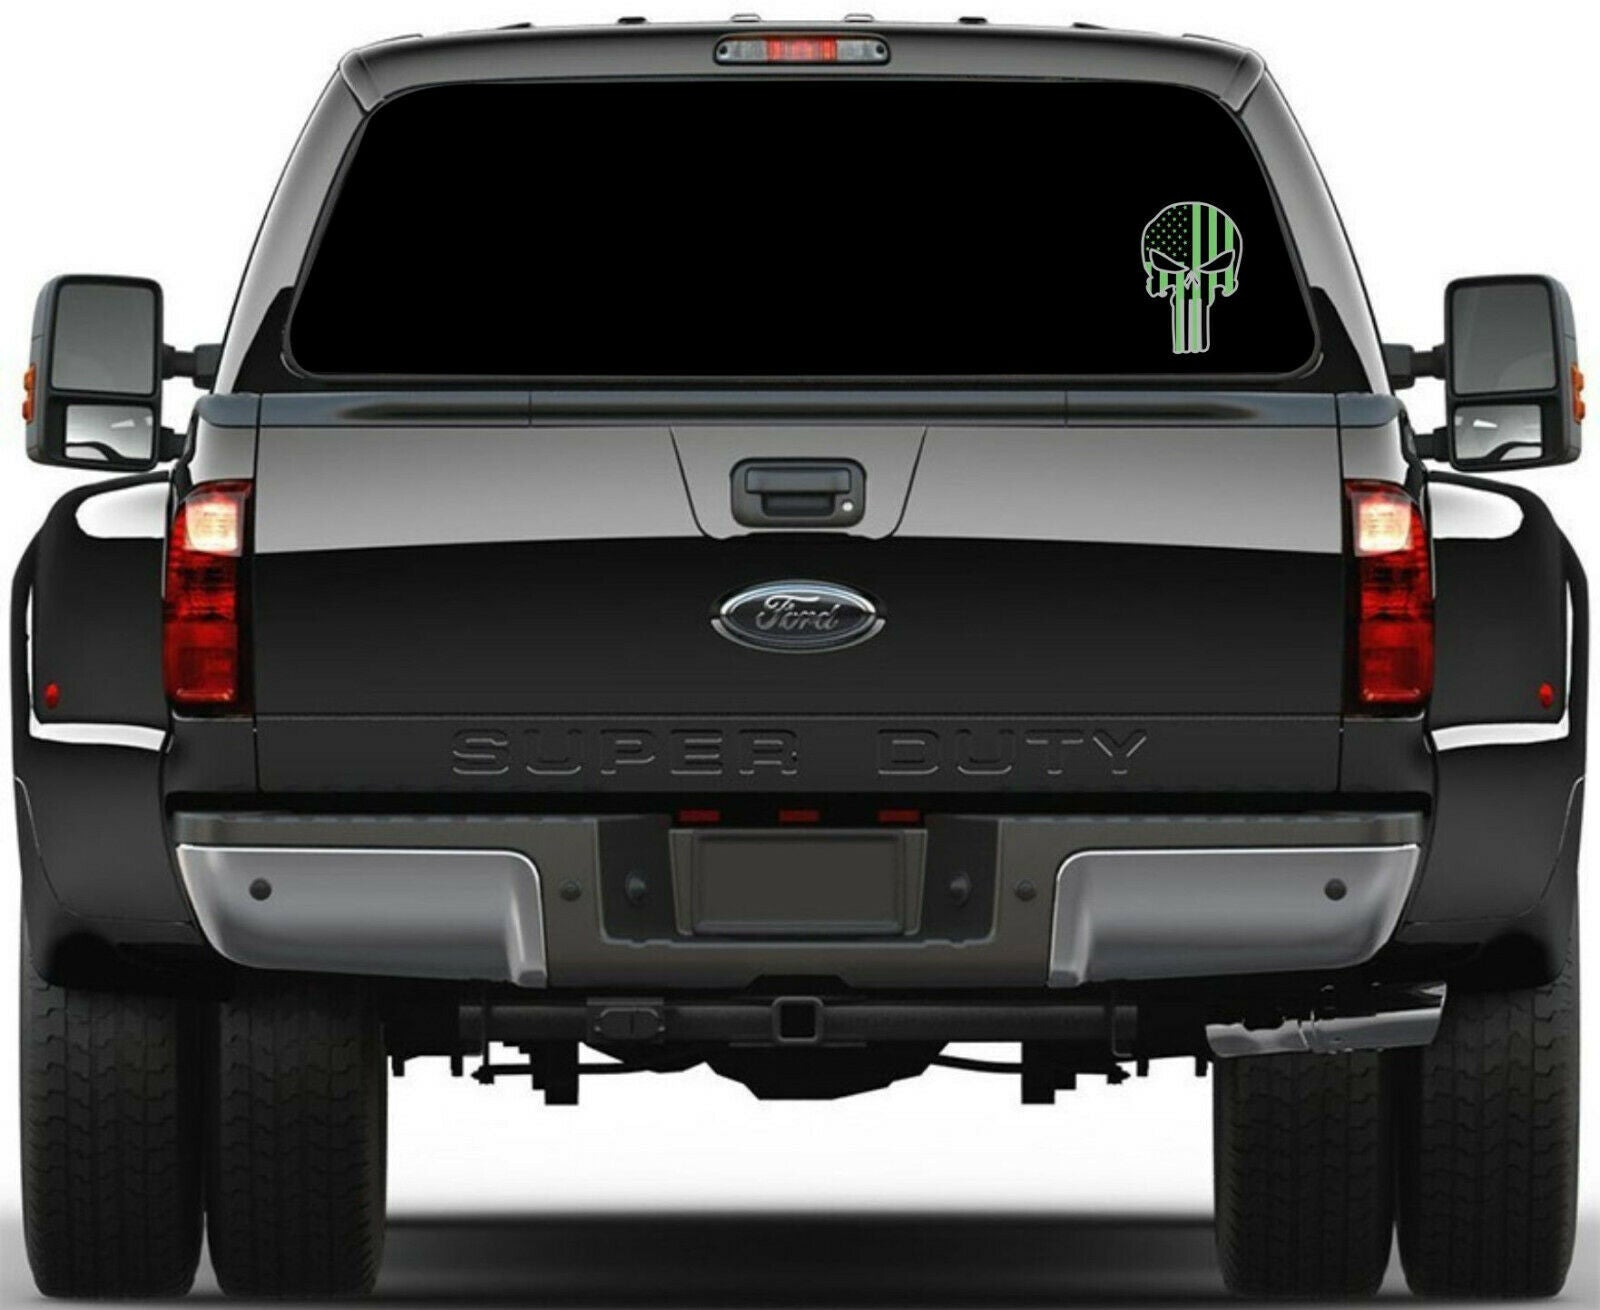 Punisher Skull American Flag Green/Black Window Decal with white outline - Powercall Sirens LLC